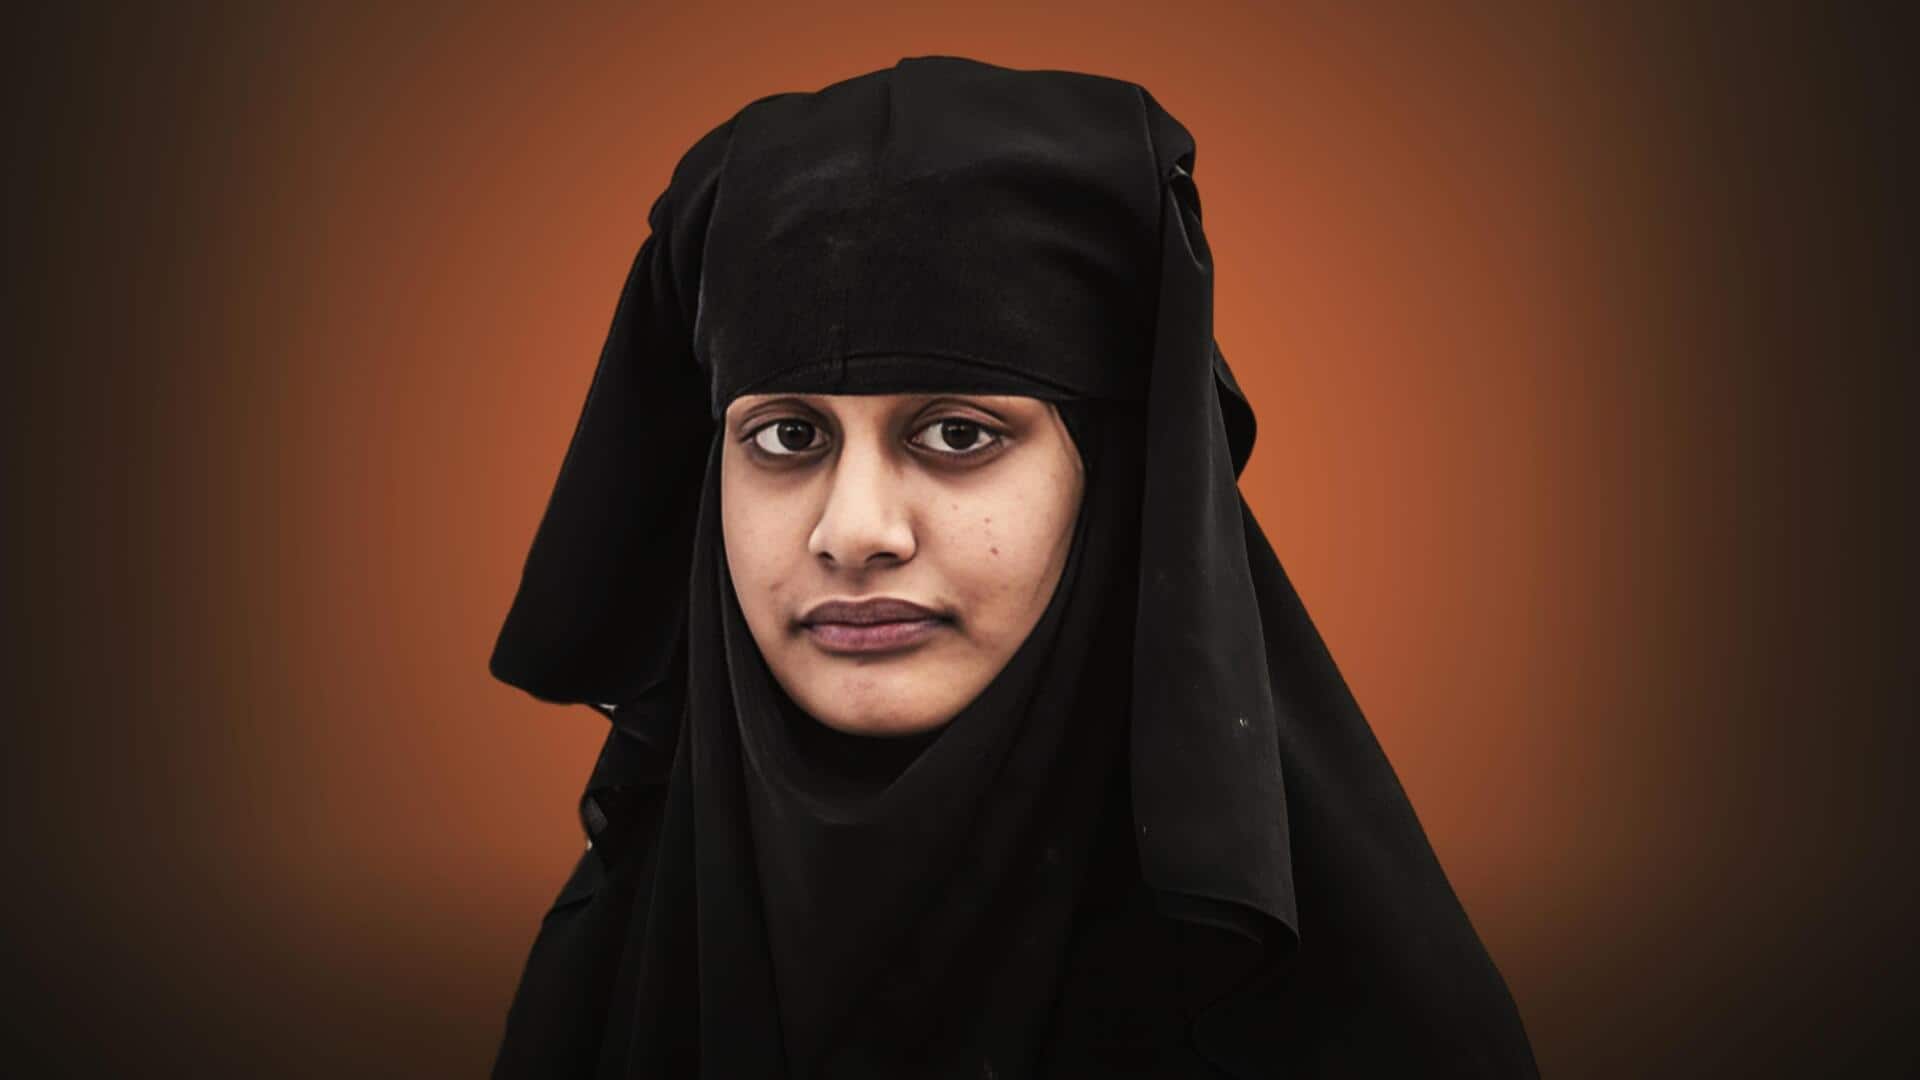 Shamima Begum, who left UK for ISIS, loses citizenship appeal